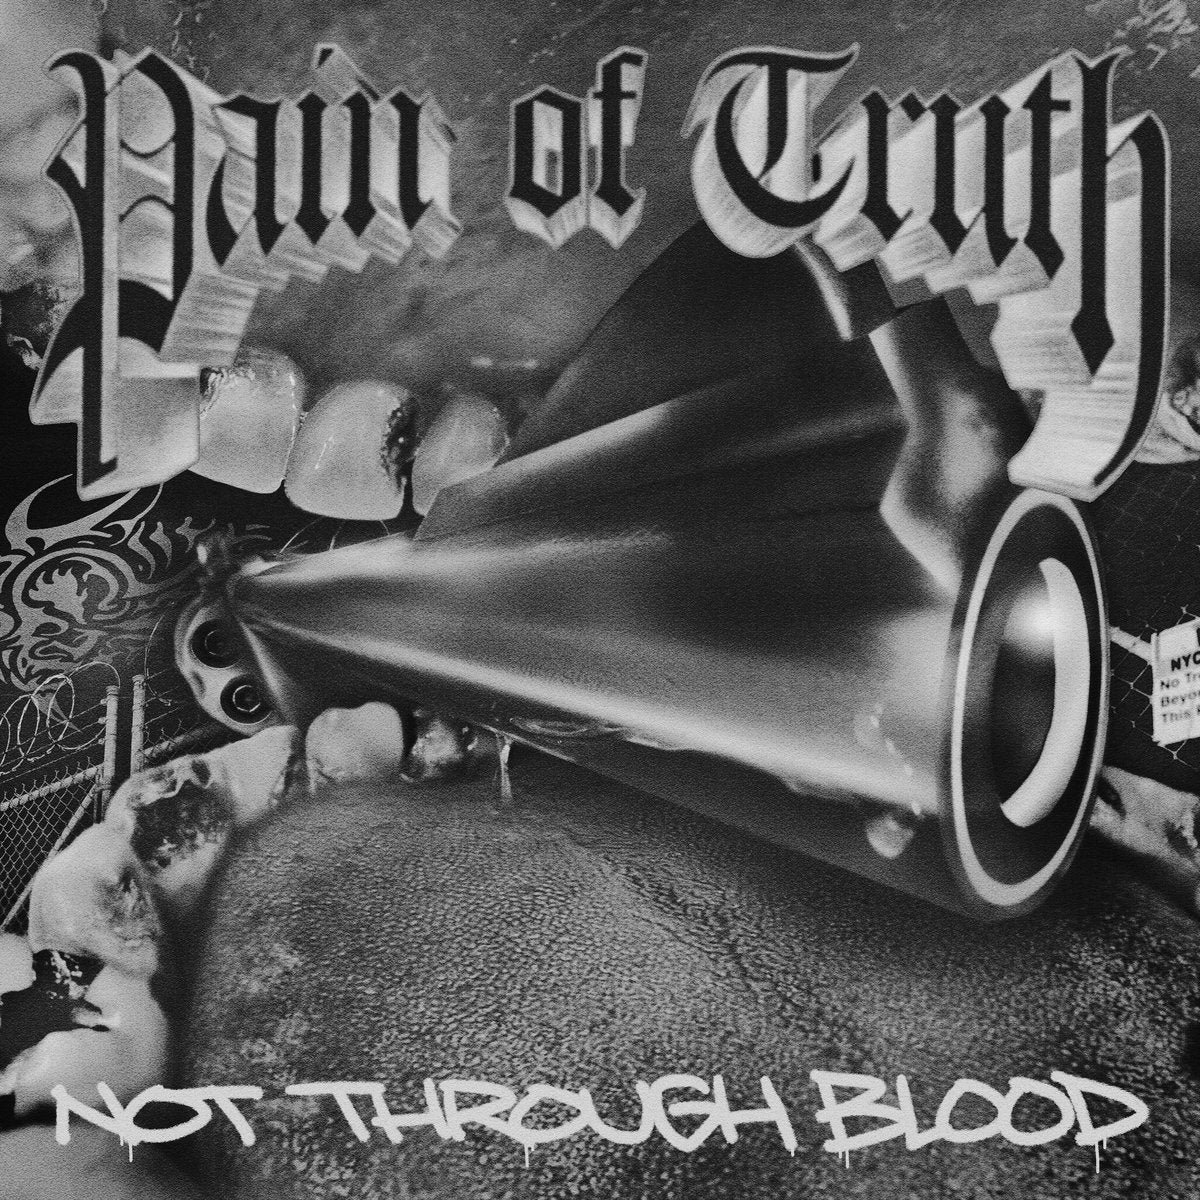 Pain Of Truth  "Not Through Blood" CD